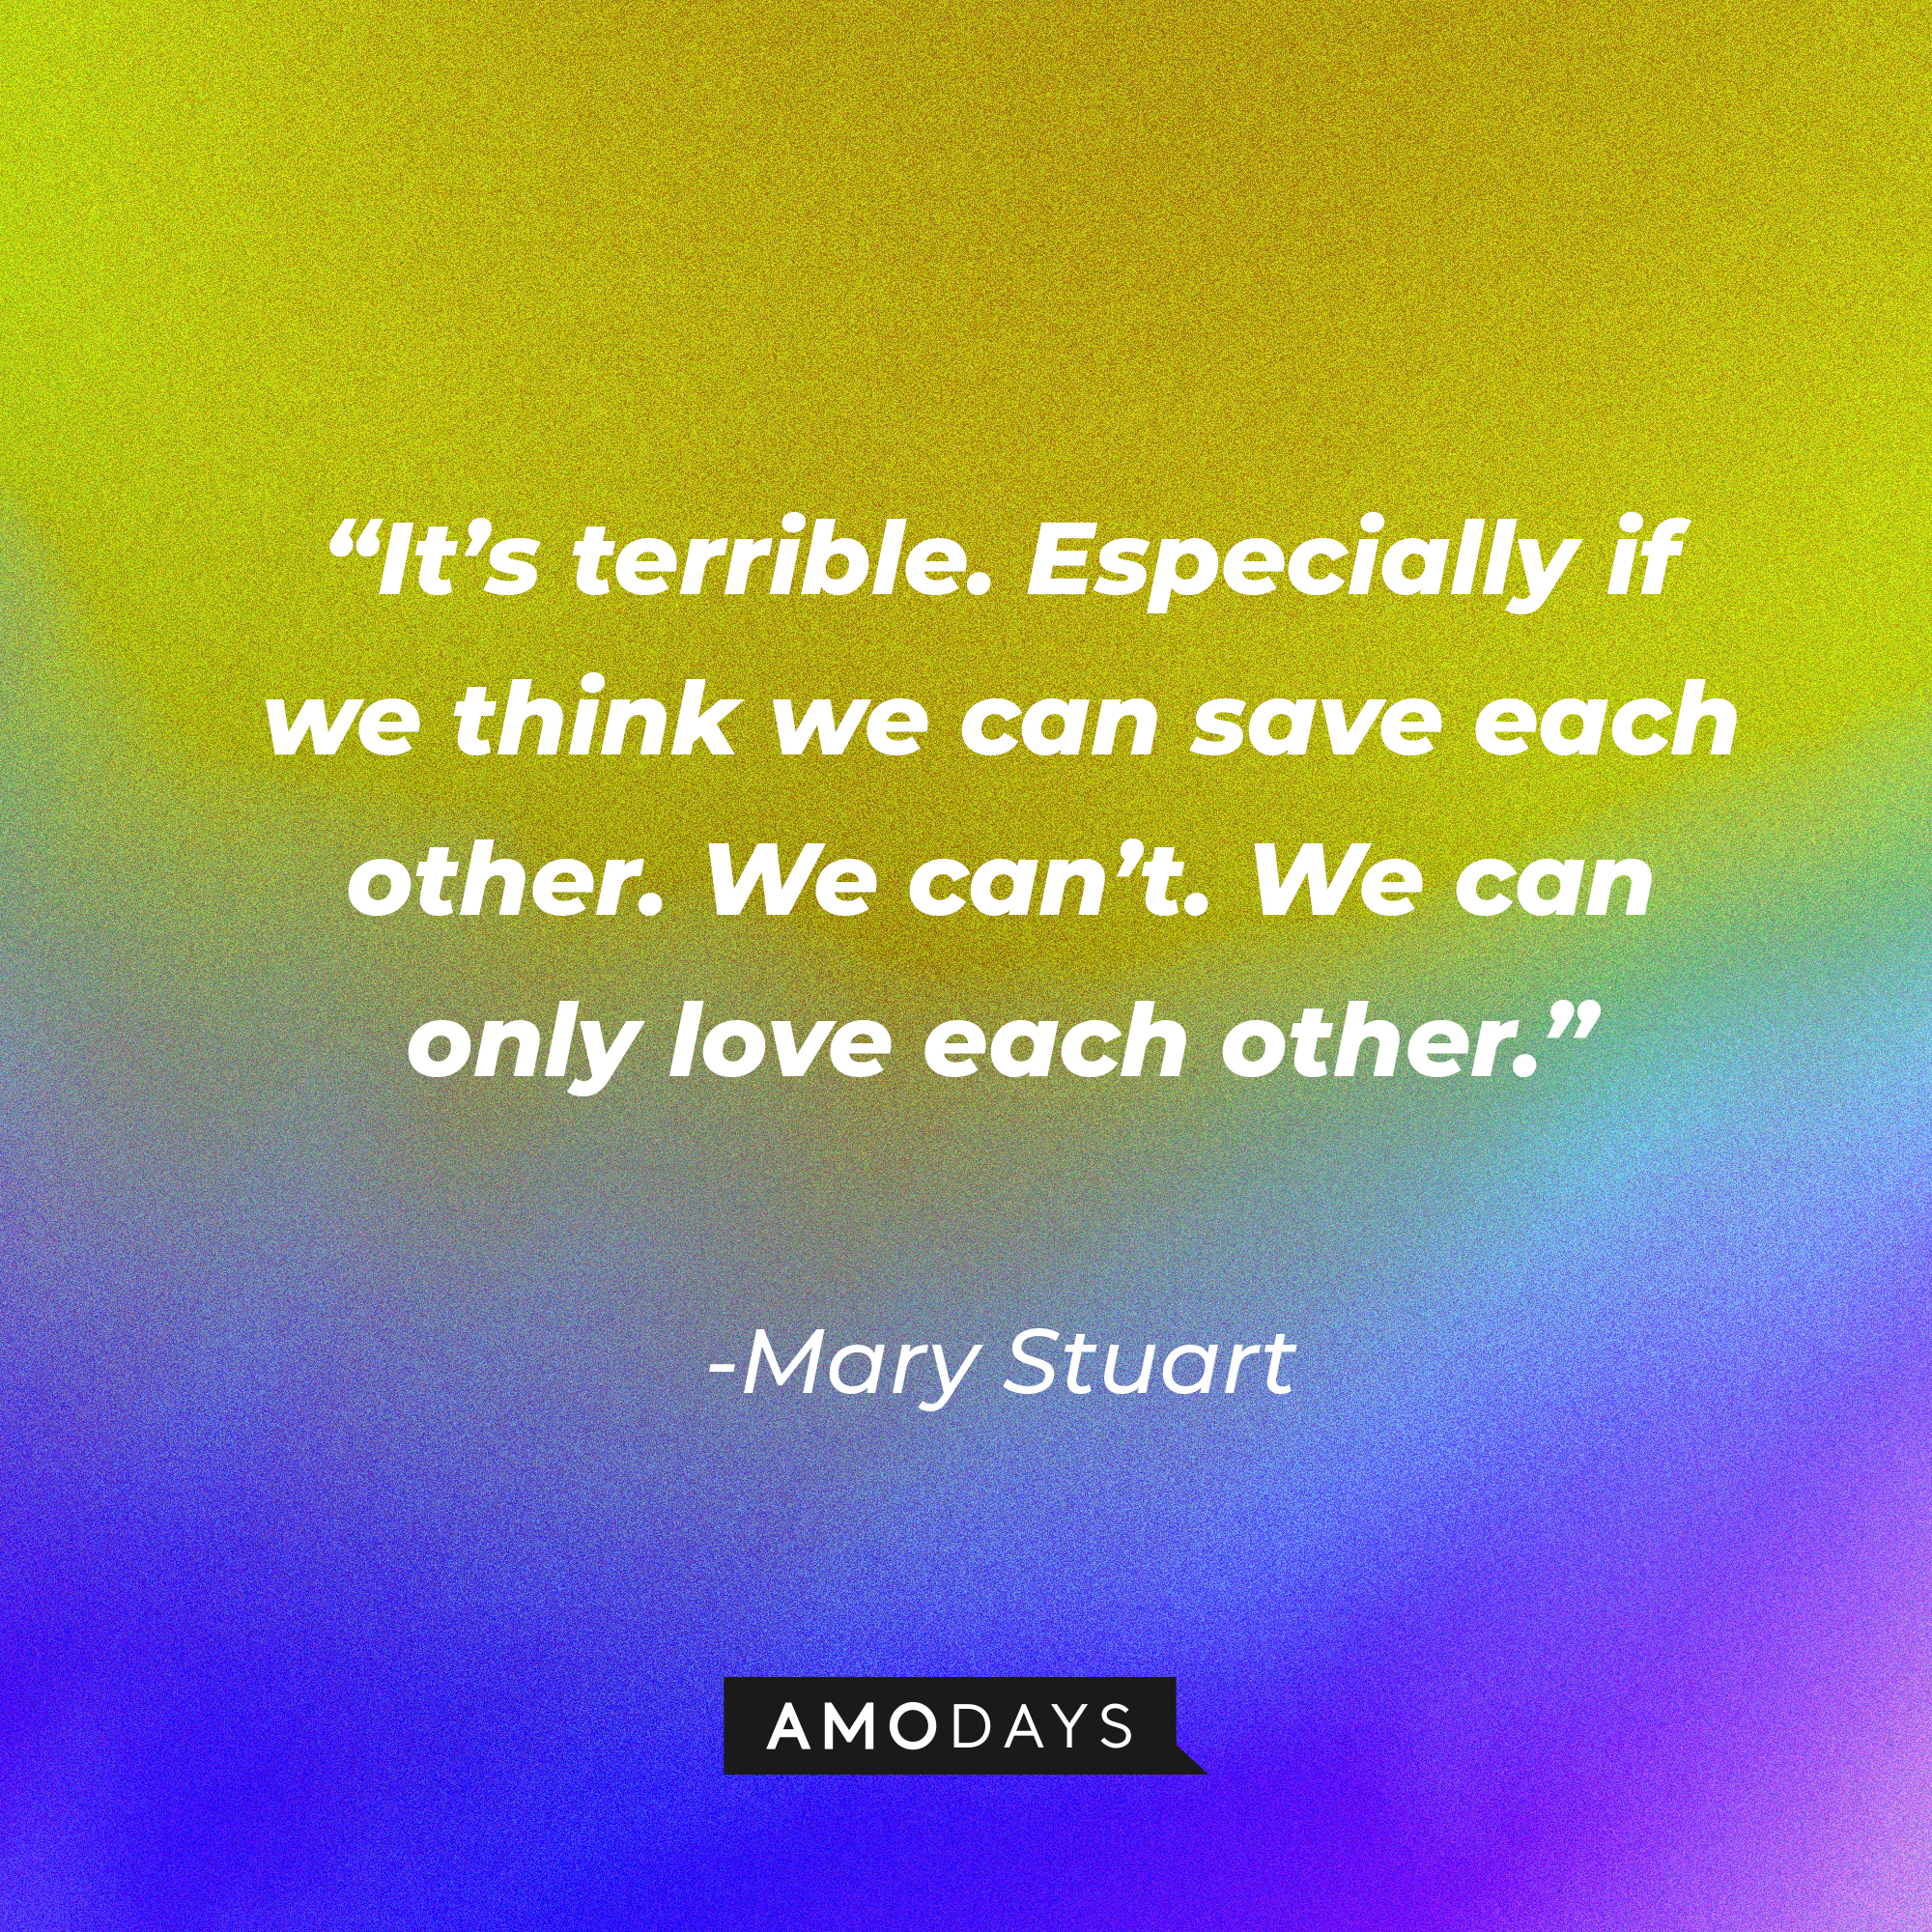 Mary Stuart's quote in "Reign:" “It’s terrible. Especially if we think we can save each other. We can’t. We can only love each other.” | Source: Amodays